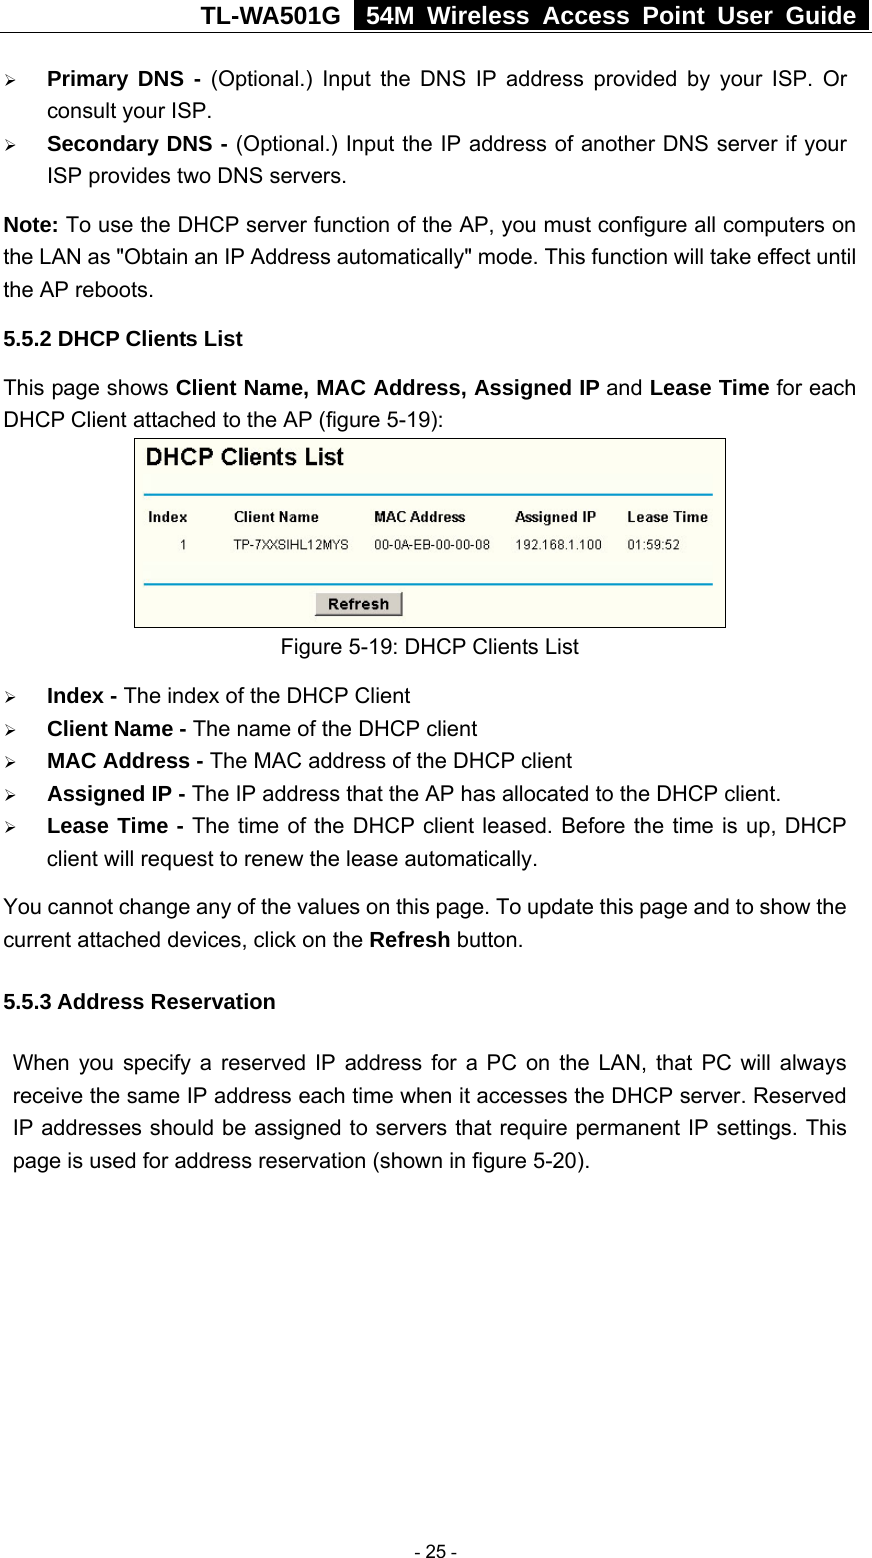 TL-WA501G   54M Wireless Access Point User Guide  ¾ Primary DNS - (Optional.) Input the DNS IP address provided by your ISP. Or consult your ISP. ¾ Secondary DNS - (Optional.) Input the IP address of another DNS server if your ISP provides two DNS servers. Note: To use the DHCP server function of the AP, you must configure all computers on the LAN as &quot;Obtain an IP Address automatically&quot; mode. This function will take effect until the AP reboots. 5.5.2 DHCP Clients List This page shows Client Name, MAC Address, Assigned IP and Lease Time for each DHCP Client attached to the AP (figure 5-19):  Figure 5-19: DHCP Clients List ¾ Index - The index of the DHCP Client   ¾ Client Name - The name of the DHCP client   ¾ MAC Address - The MAC address of the DHCP client   ¾ Assigned IP - The IP address that the AP has allocated to the DHCP client. ¾ Lease Time - The time of the DHCP client leased. Before the time is up, DHCP client will request to renew the lease automatically. You cannot change any of the values on this page. To update this page and to show the current attached devices, click on the Refresh button. 5.5.3 Address Reservation When you specify a reserved IP address for a PC on the LAN, that PC will always receive the same IP address each time when it accesses the DHCP server. Reserved IP addresses should be assigned to servers that require permanent IP settings. This page is used for address reservation (shown in figure 5-20).  - 25 - 